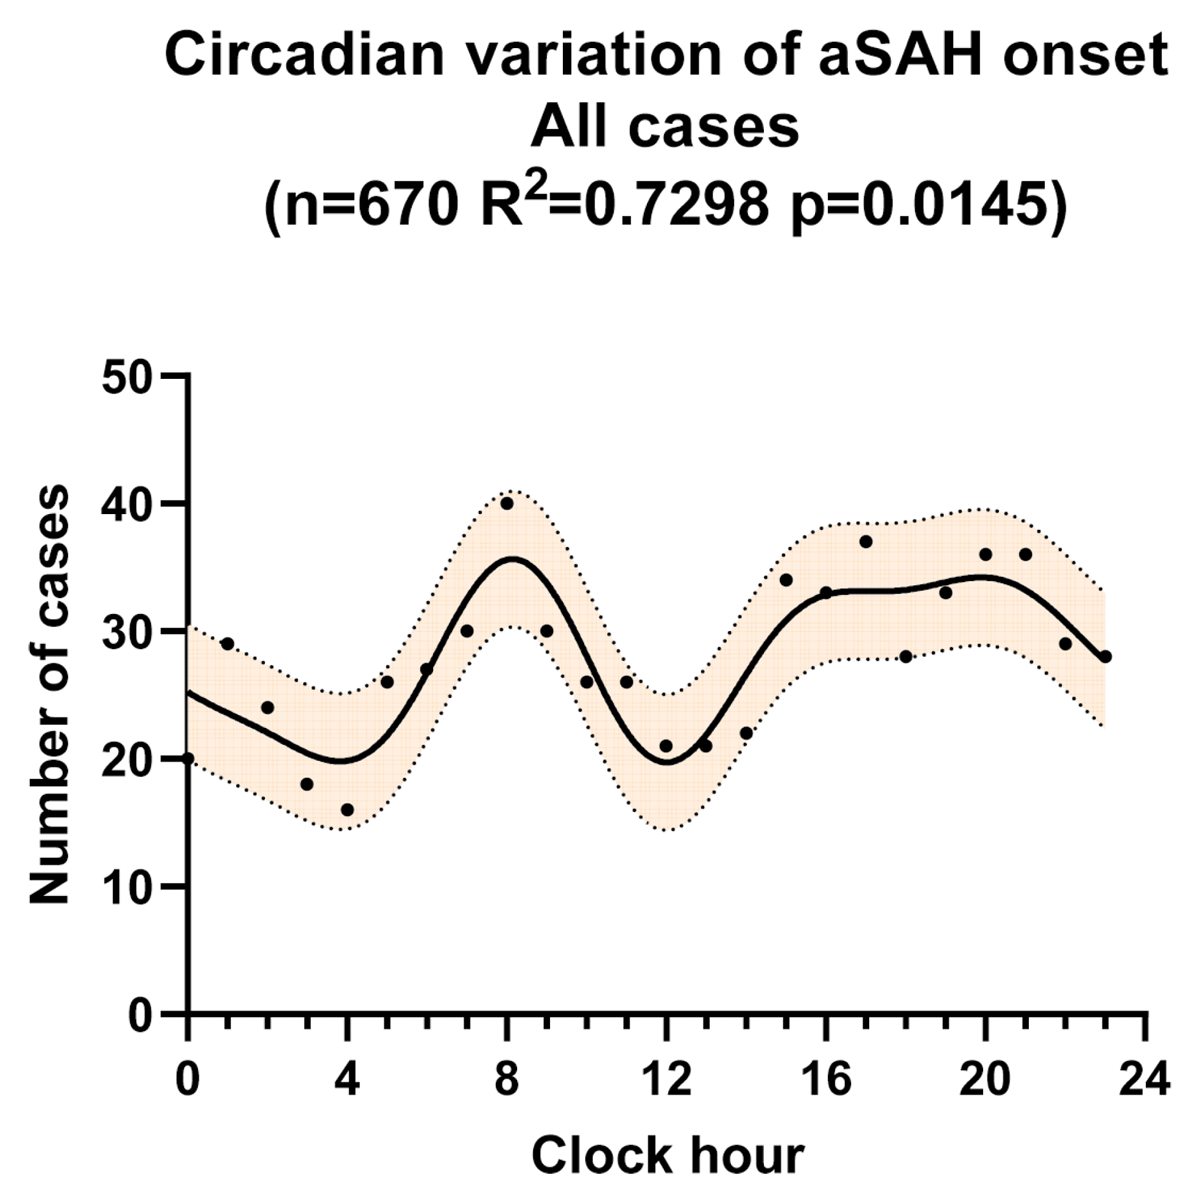 Circadian variation of aSAH onset for all cases, fitted by a four-harmonic Fourier model with periods of 24, 12, 8, and 6 hours. The solid line is the calculated best-fitting curve. The filled area represents 95% CI. aSAH, aneurysmal subarachnoid hemorrhage